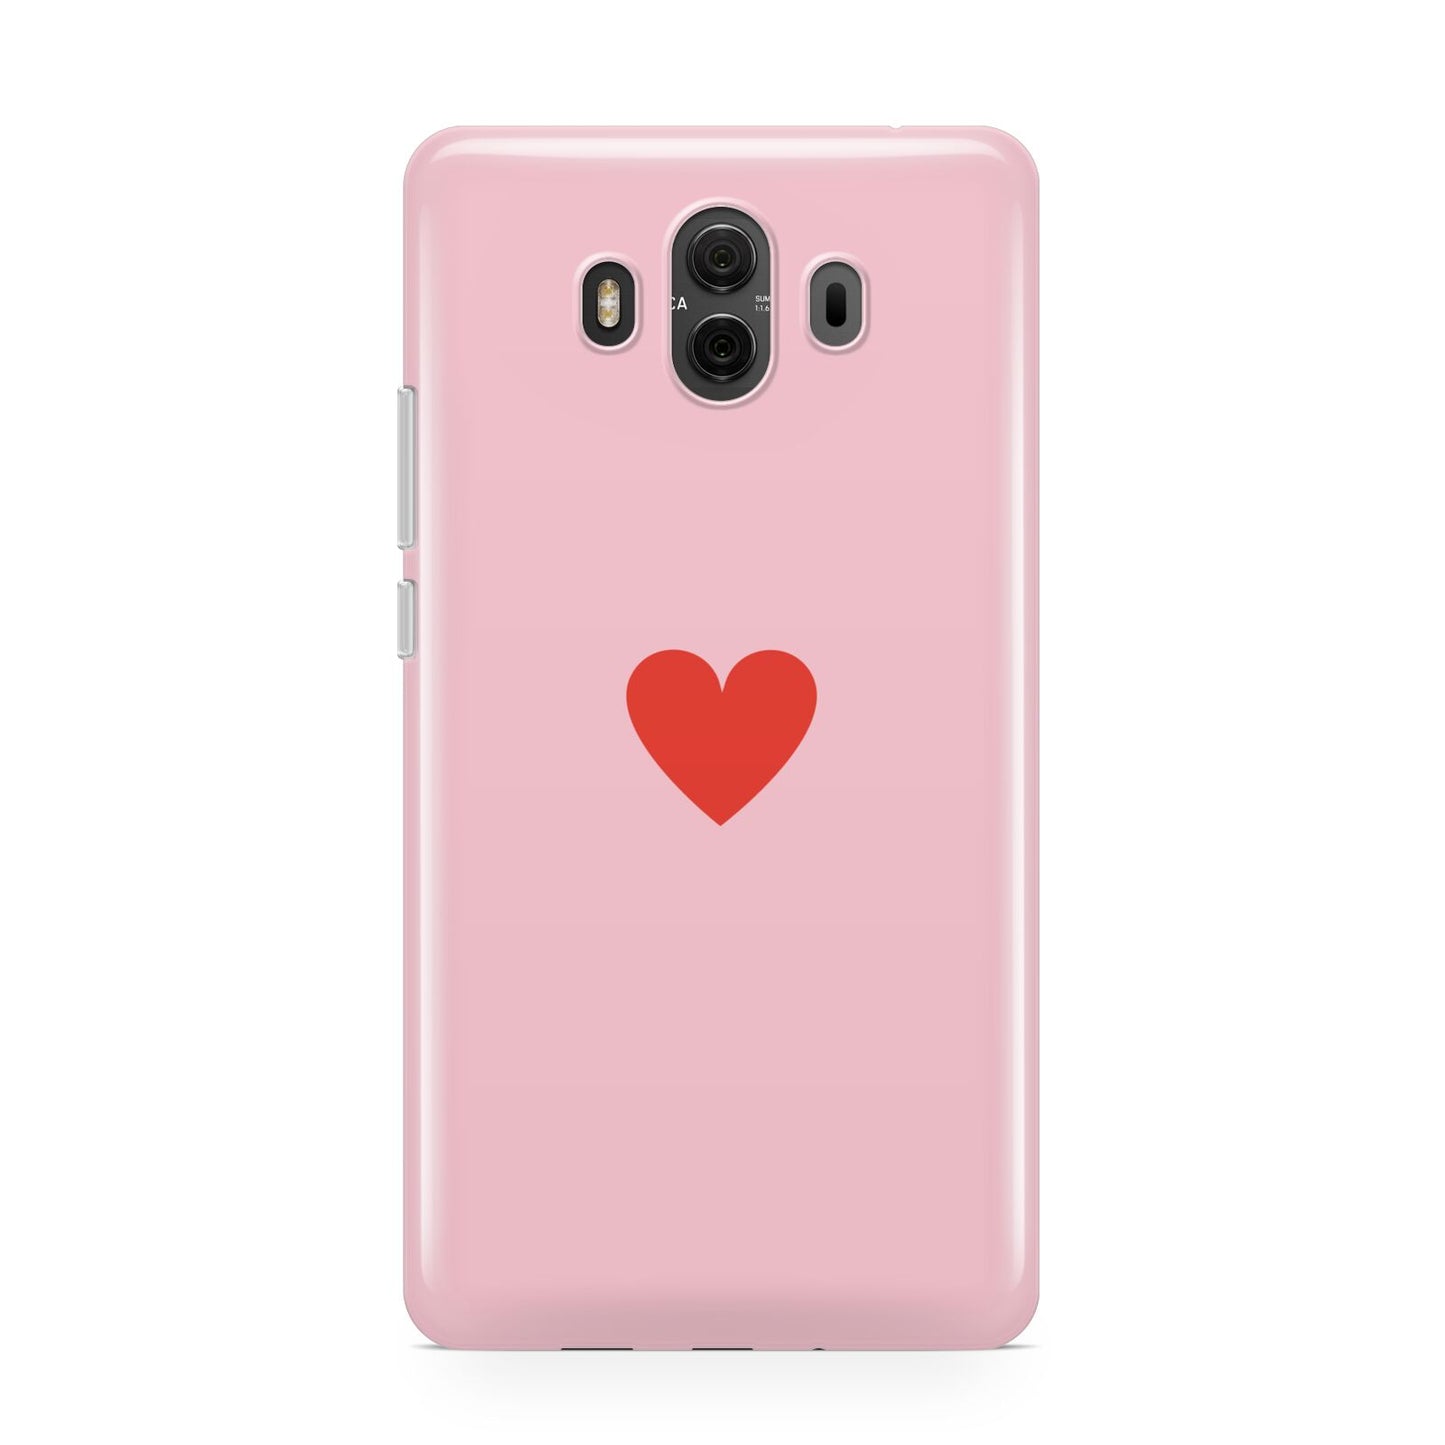 Red Heart Huawei Mate 10 Protective Phone Case